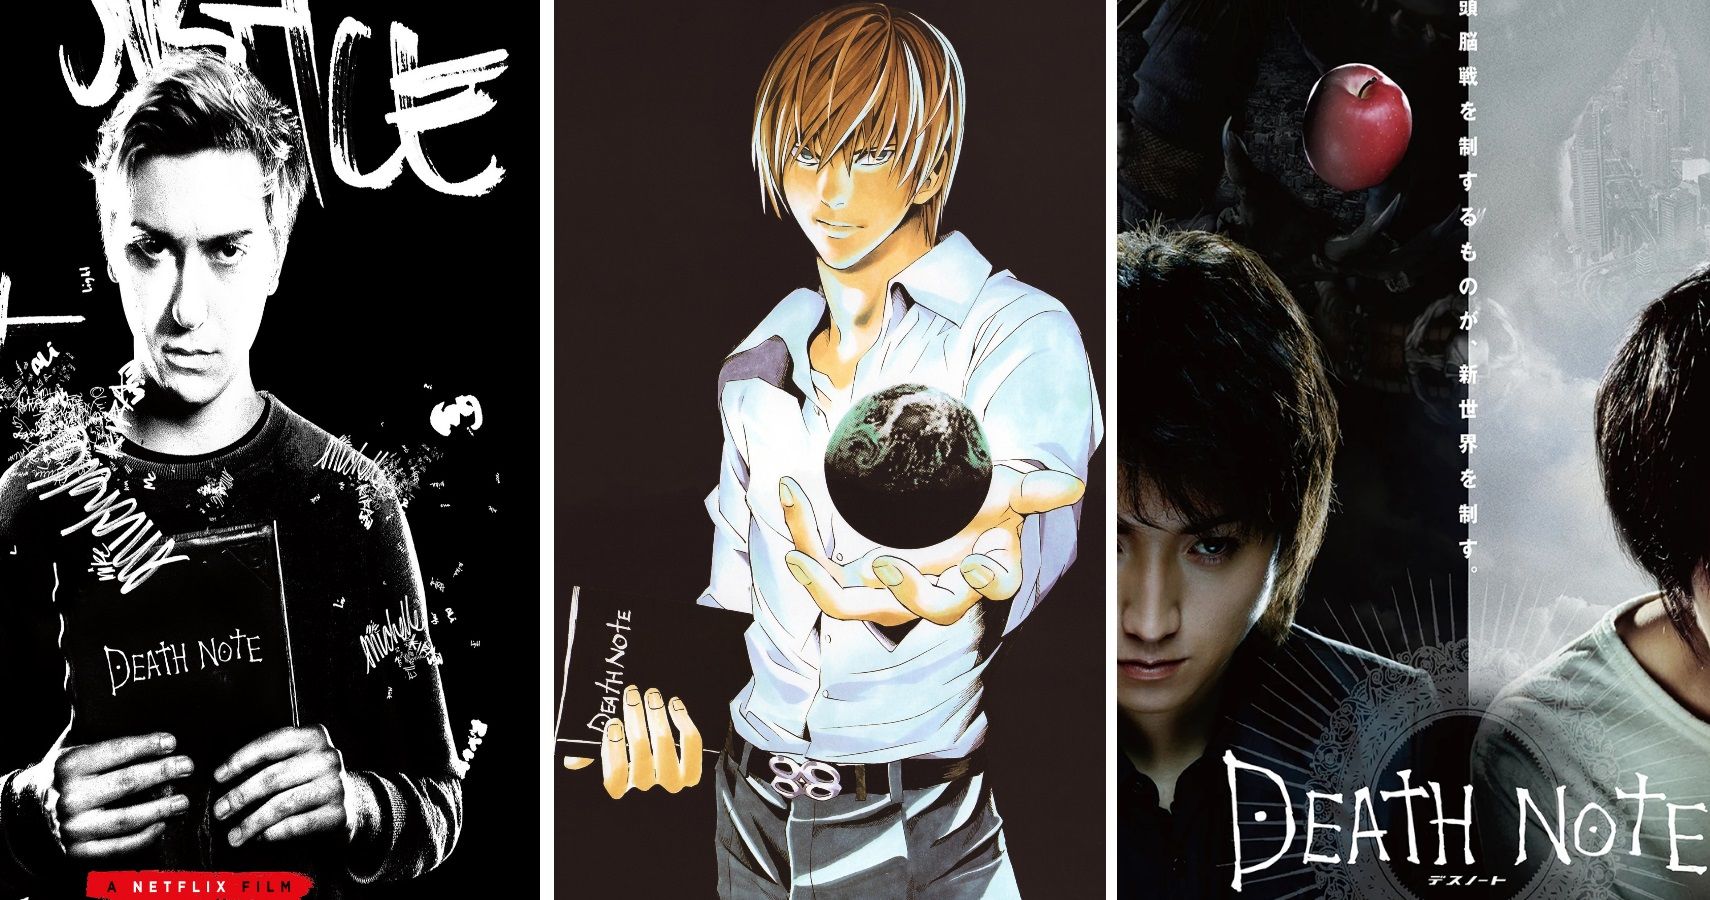 Anime Your Way: From manga to animeto live-action: Death Note  live-action movie impressions